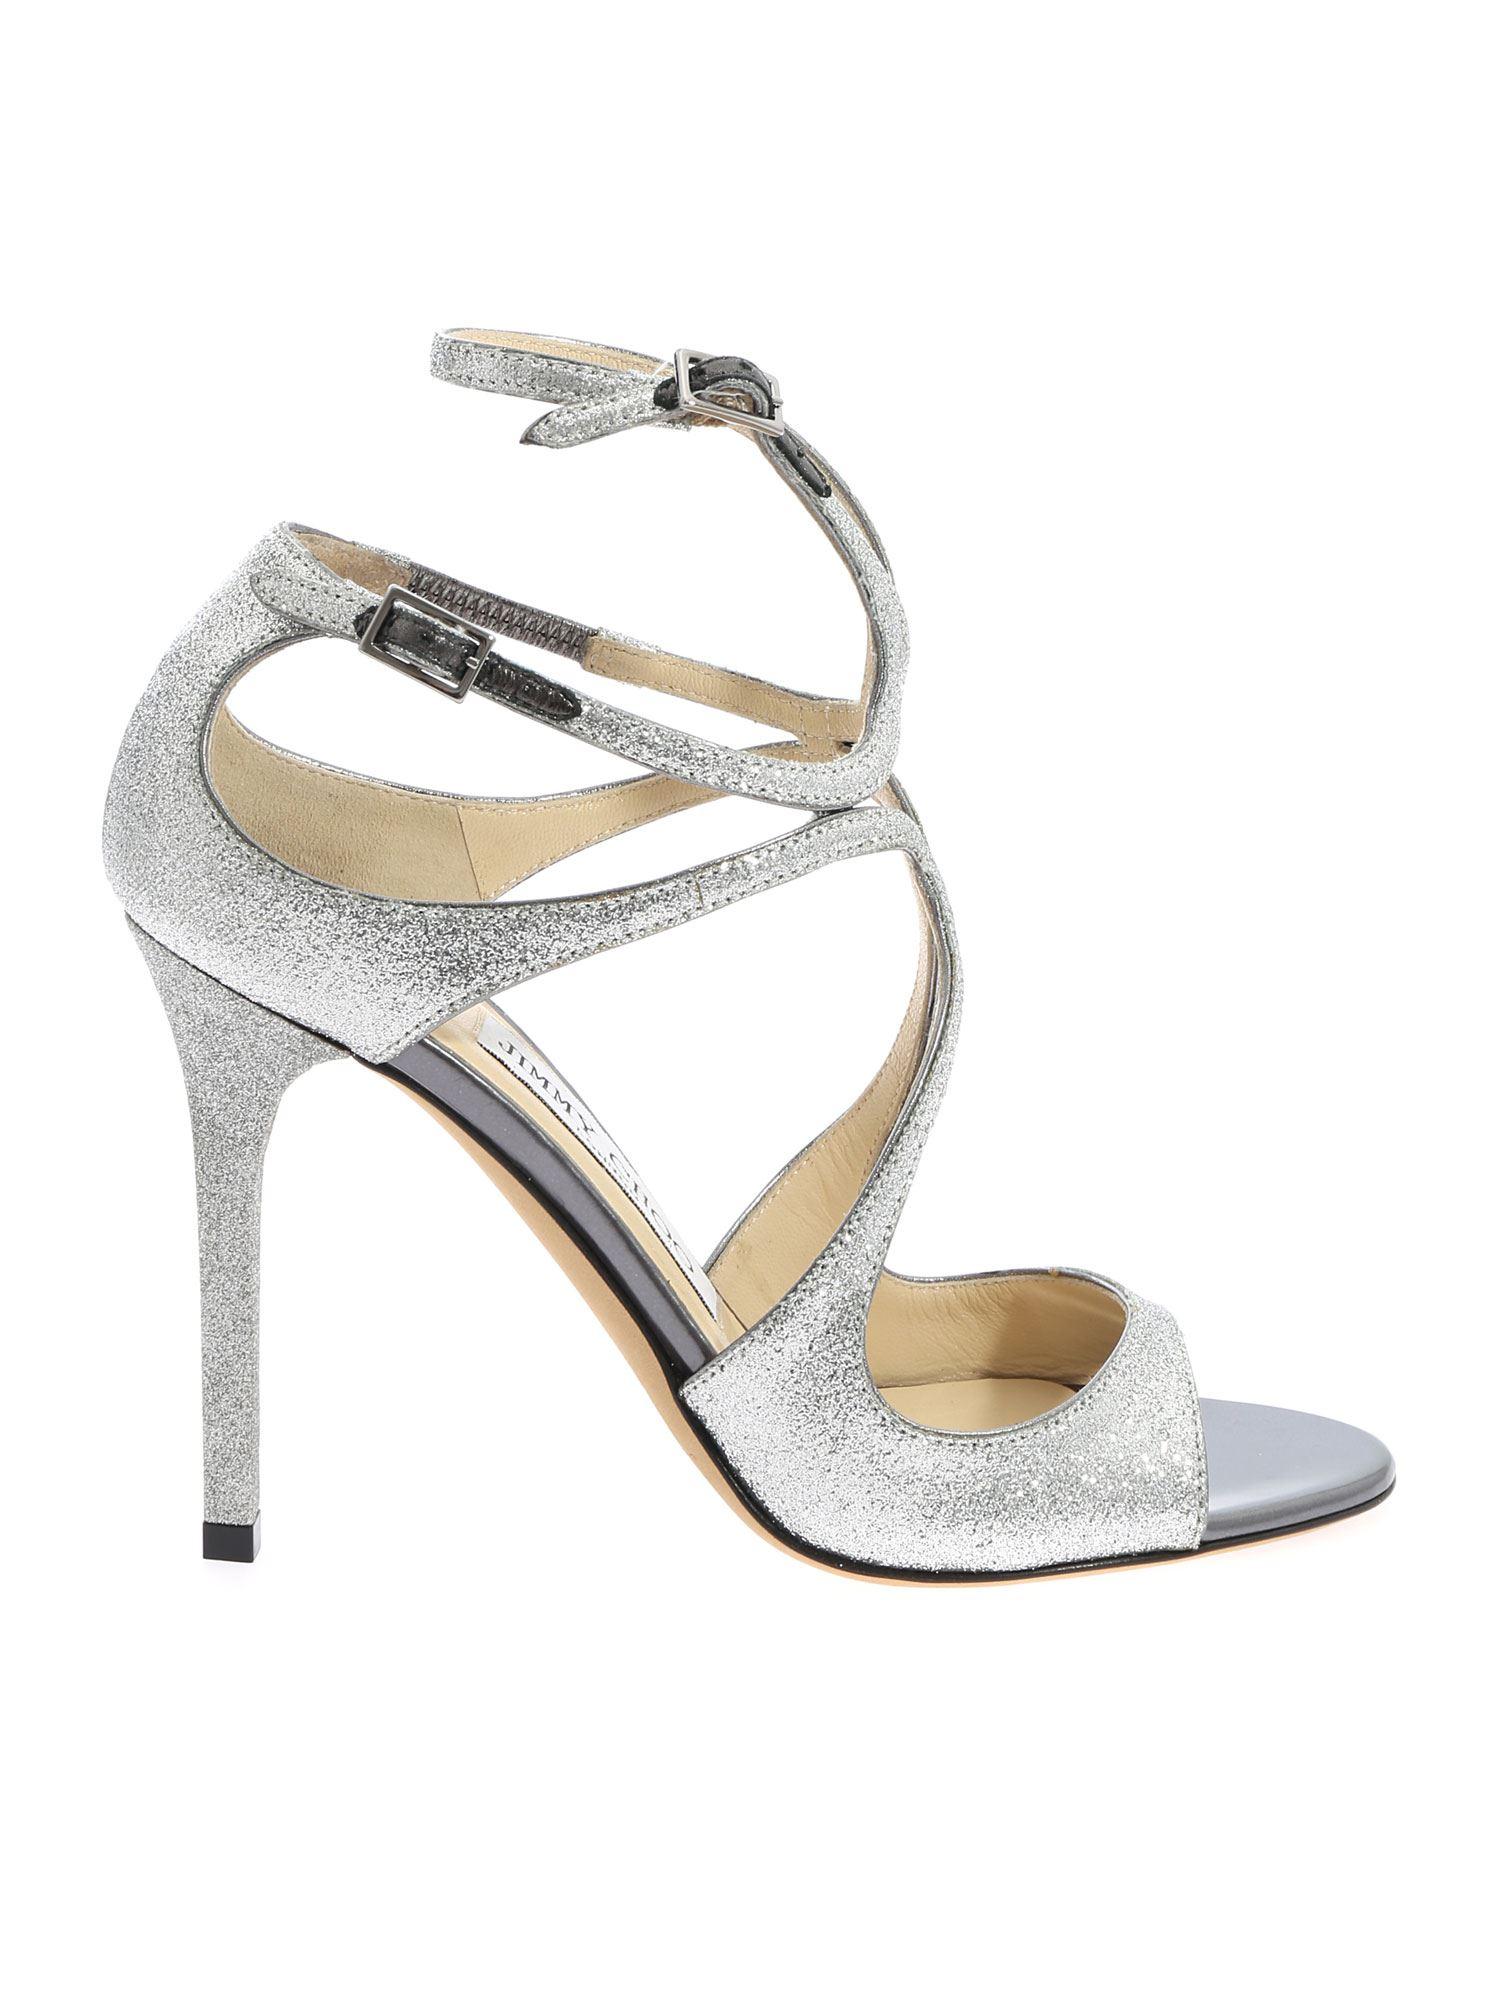 Jimmy Choo Leather Silver Glittered Lang Sandals in Metallic - Lyst